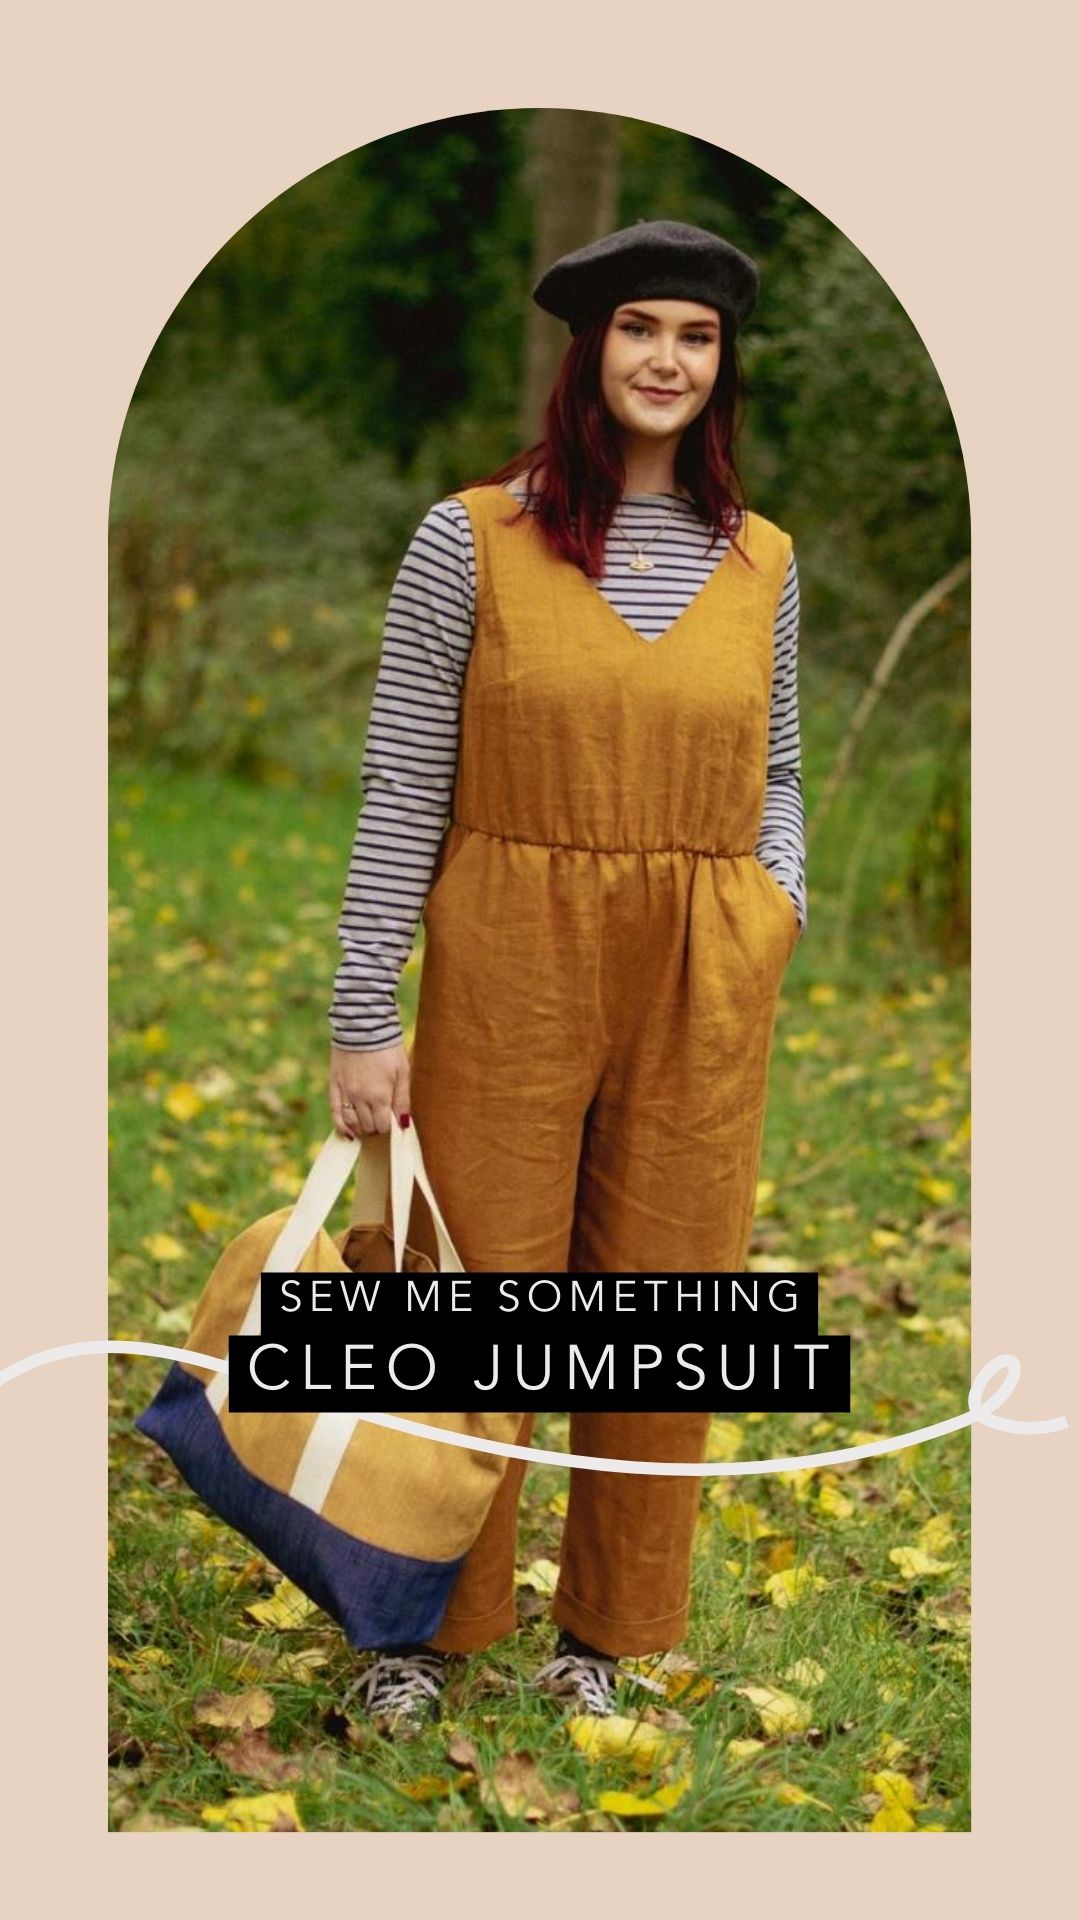 Top 10 Jumpsuits to Sew for Spring - The Fold Line